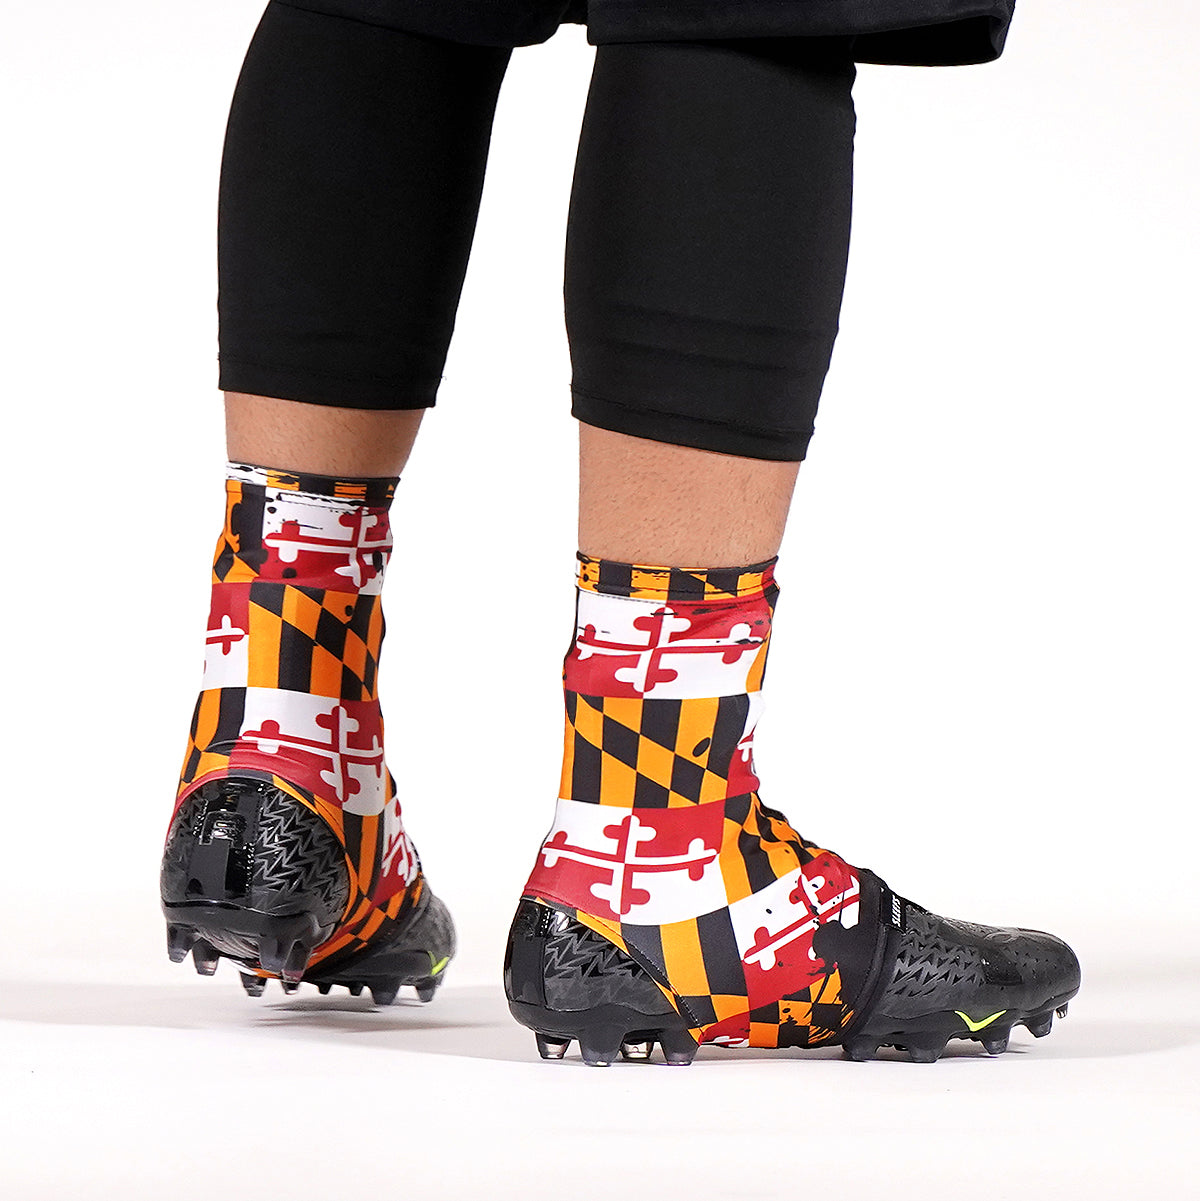 Maryland State Flag Spats / Cleat Covers